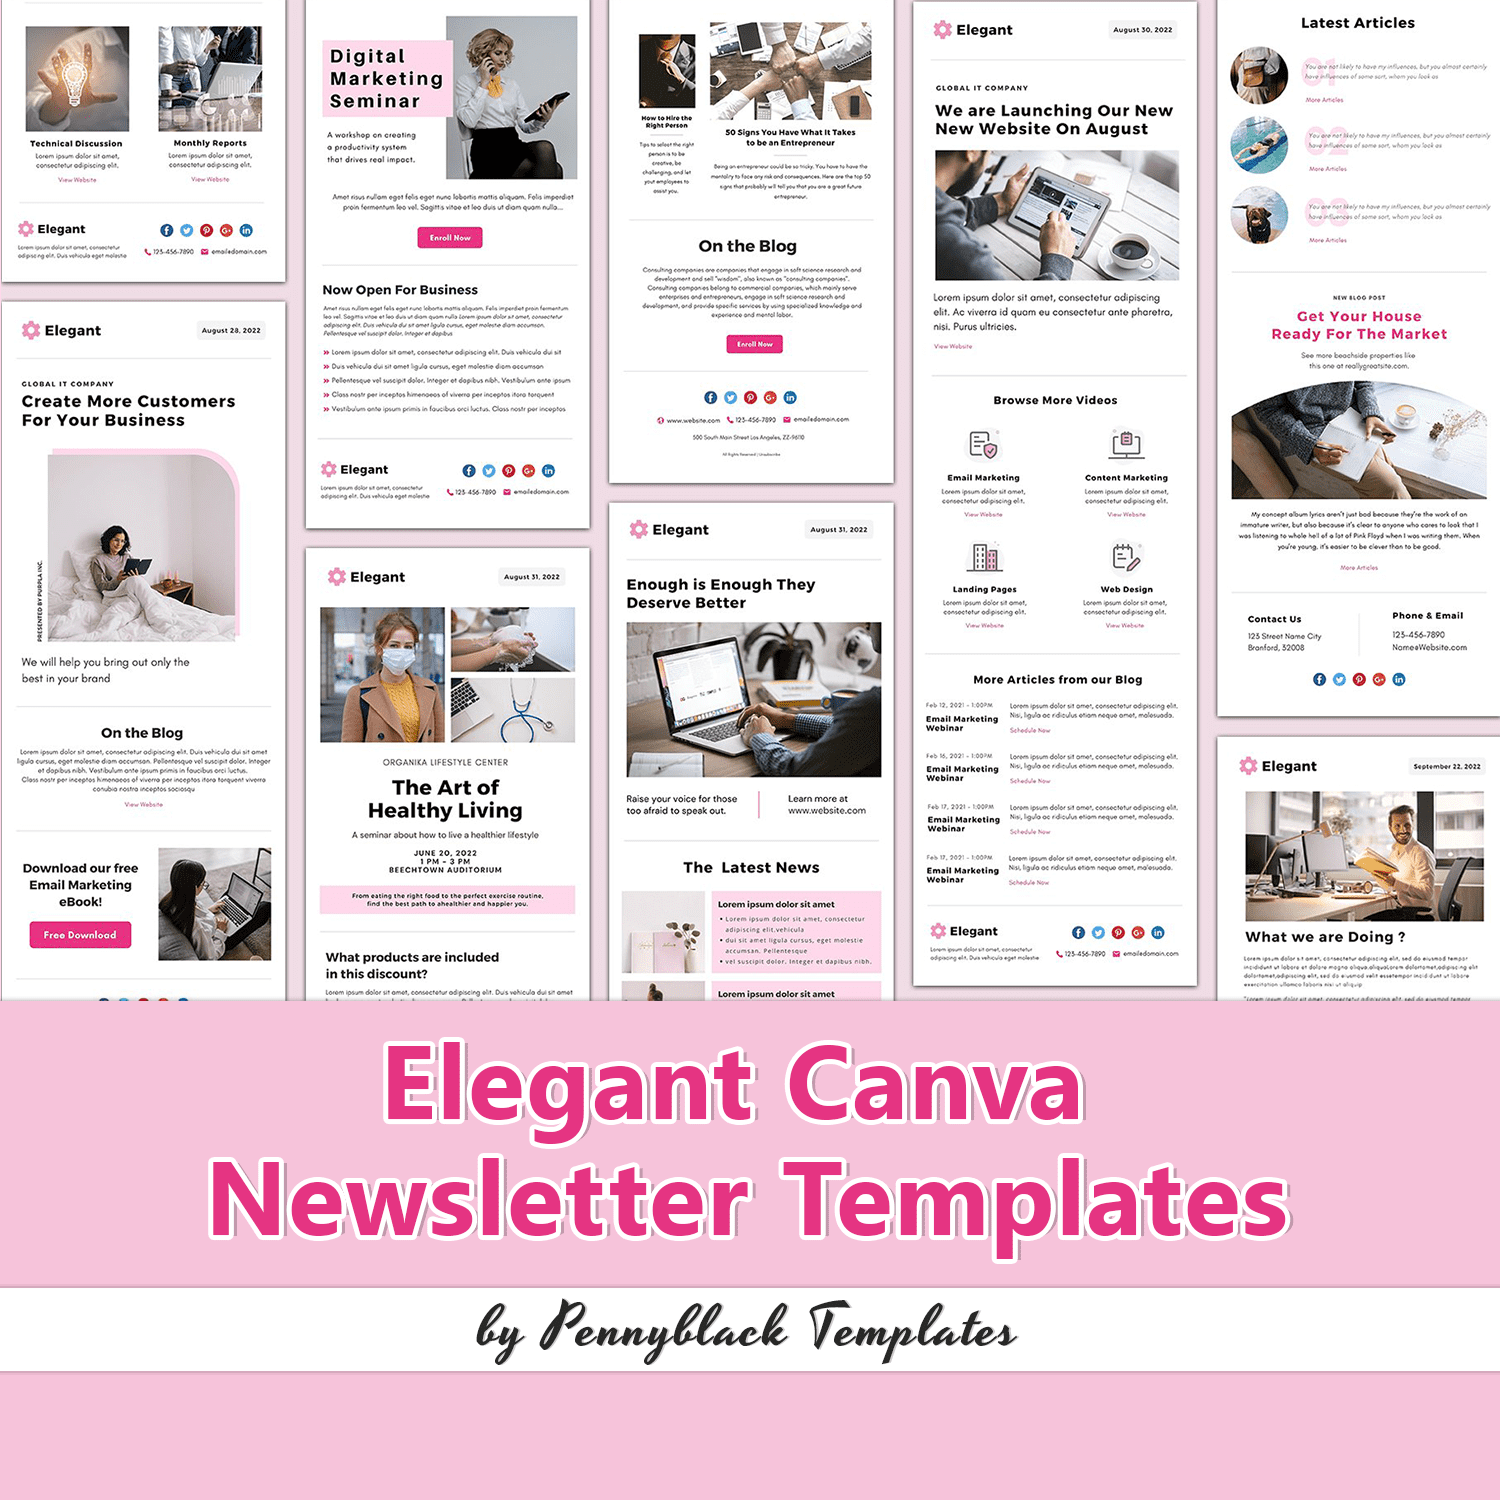 A set of images of adorable newsletter templates.